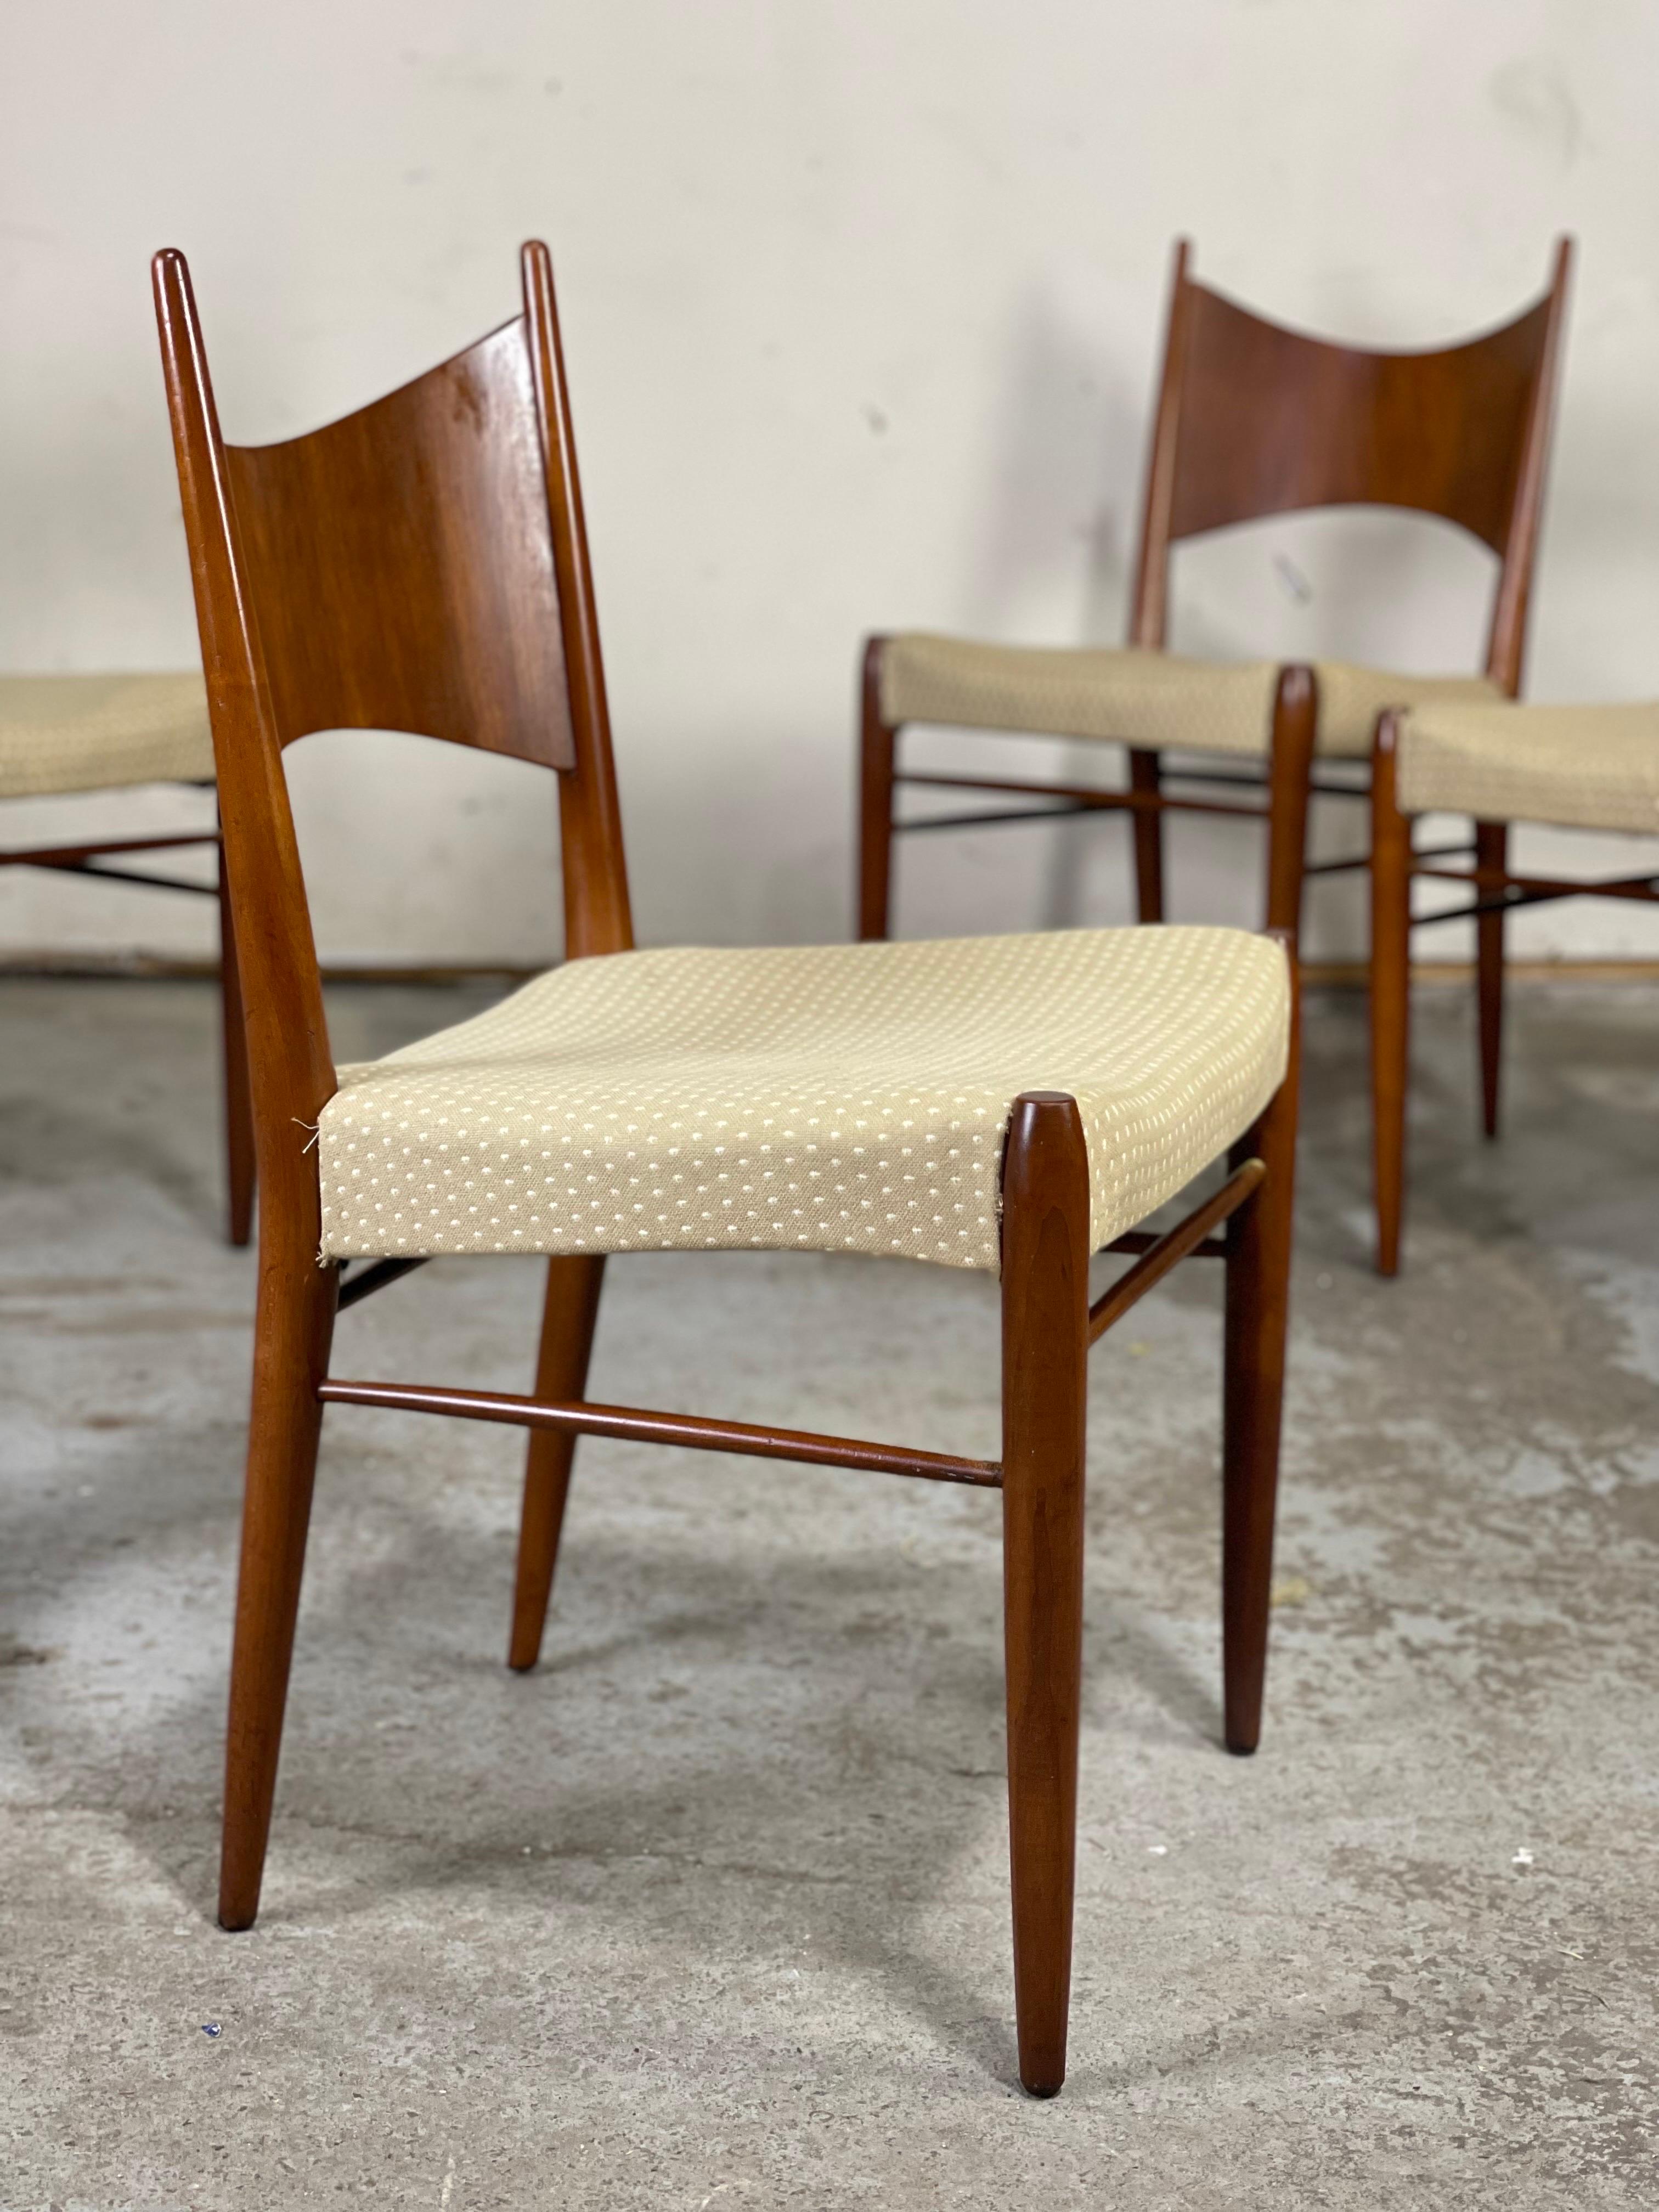 Set of four rare Kipp Stewart Calvin Line dining chairs by Winchendon. These are made by the same company and shared line of Paul McCobb - as you can see the numerous similarities as these chairs often are mistaken for McCobb with the pointed and